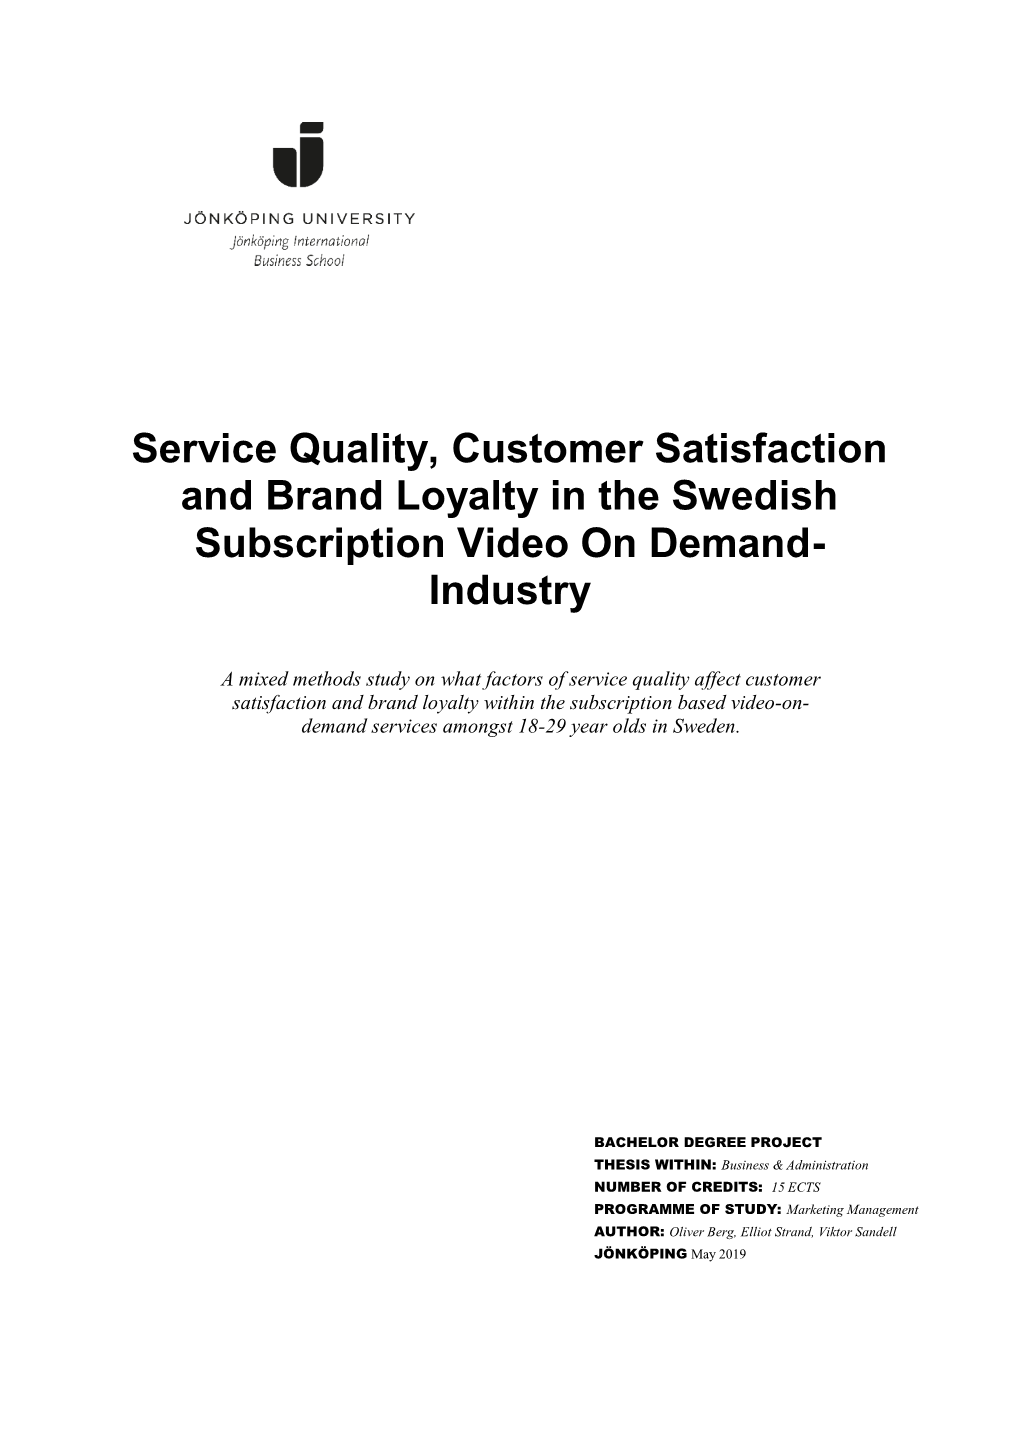 Service Quality, Customer Satisfaction and Brand Loyalty in the Swedish Subscription Video on Demand- Industry